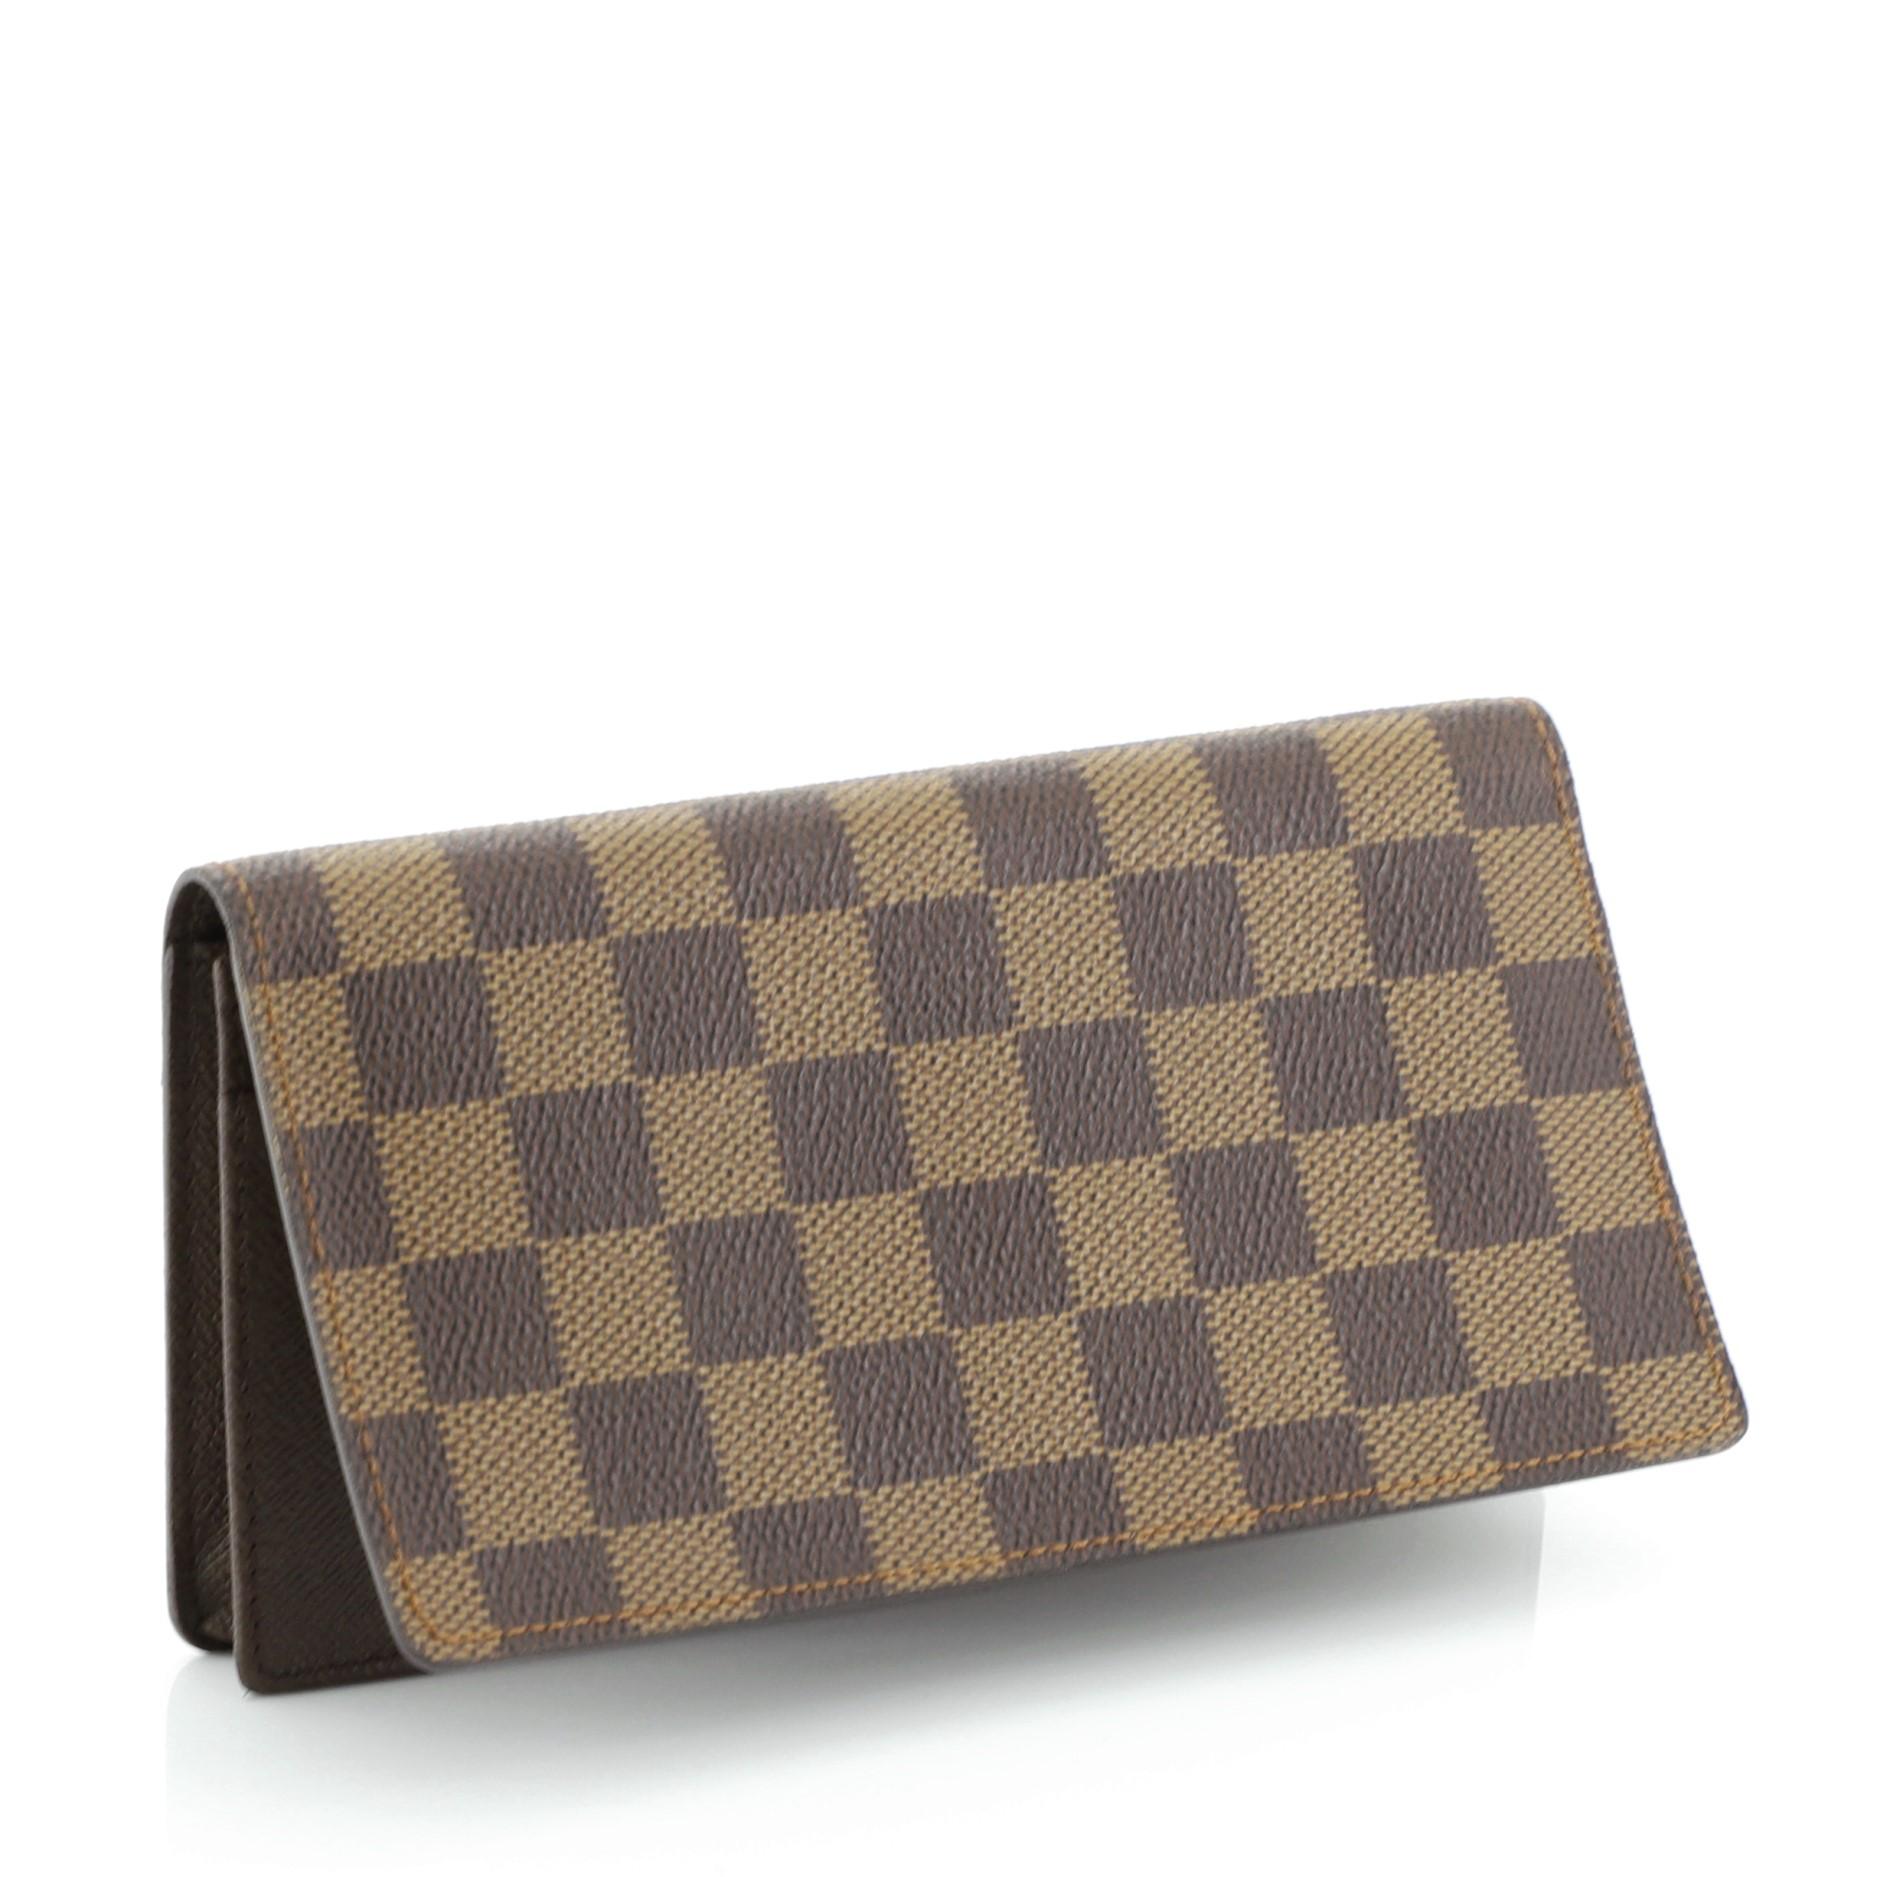 This Louis Vuitton Brazza Wallet Damier, crafted in damier ebene coated canvas. It opens to a brown leather interior with multiple card slots and zip and slip pockets. Authenticity code reads: CT0073. 

Estimated Retail Price: $705
Condition: Great.